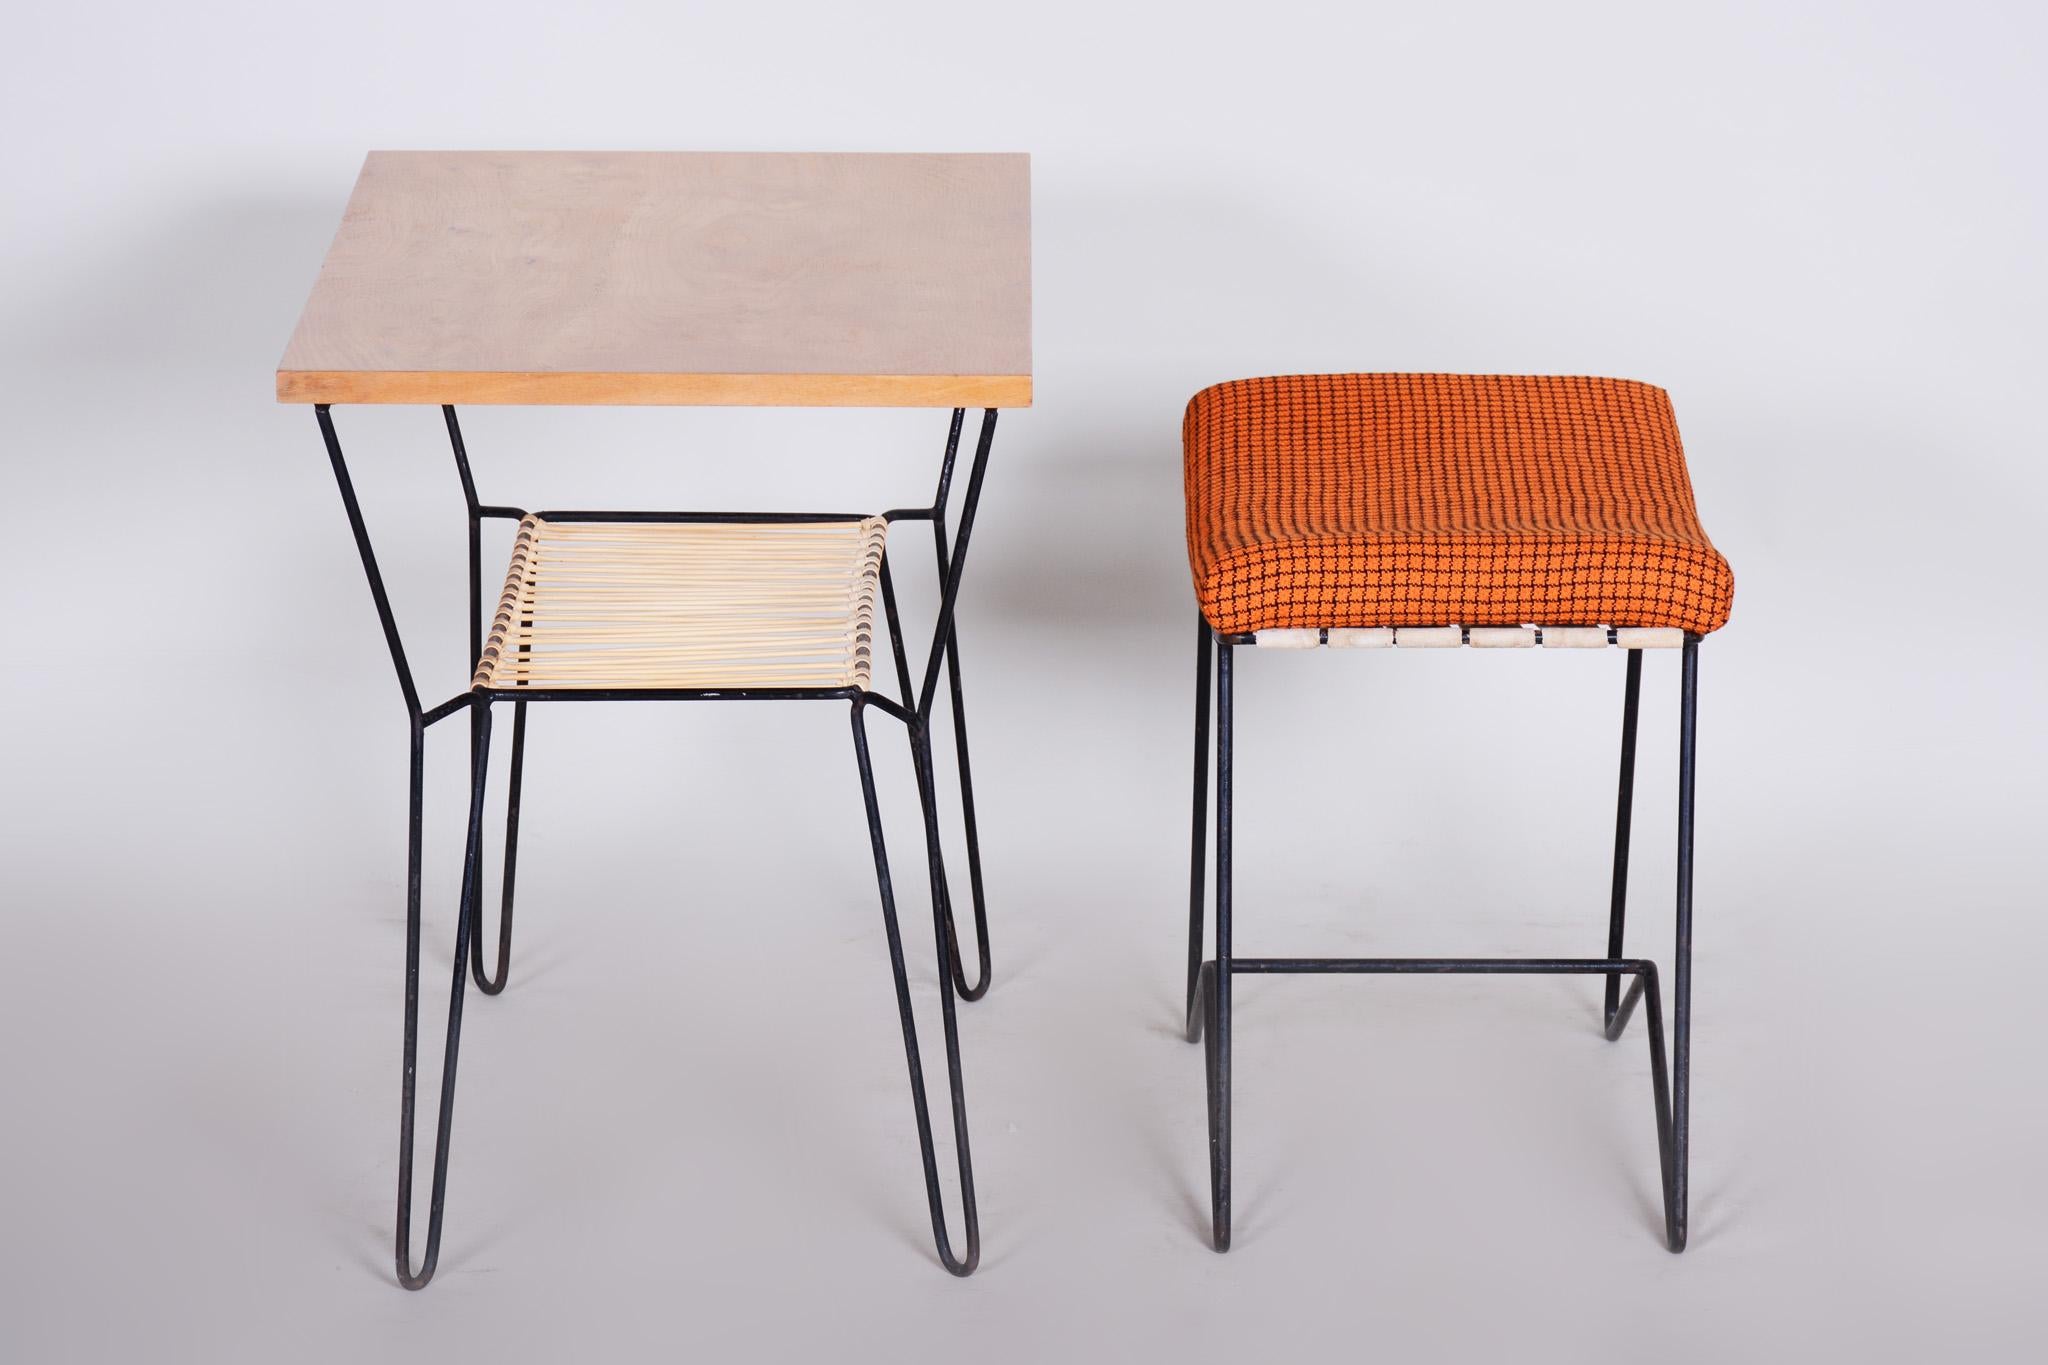 Set of Midcentury Orange Stool and Beech Table, Preserved Condition, 1950s For Sale 2